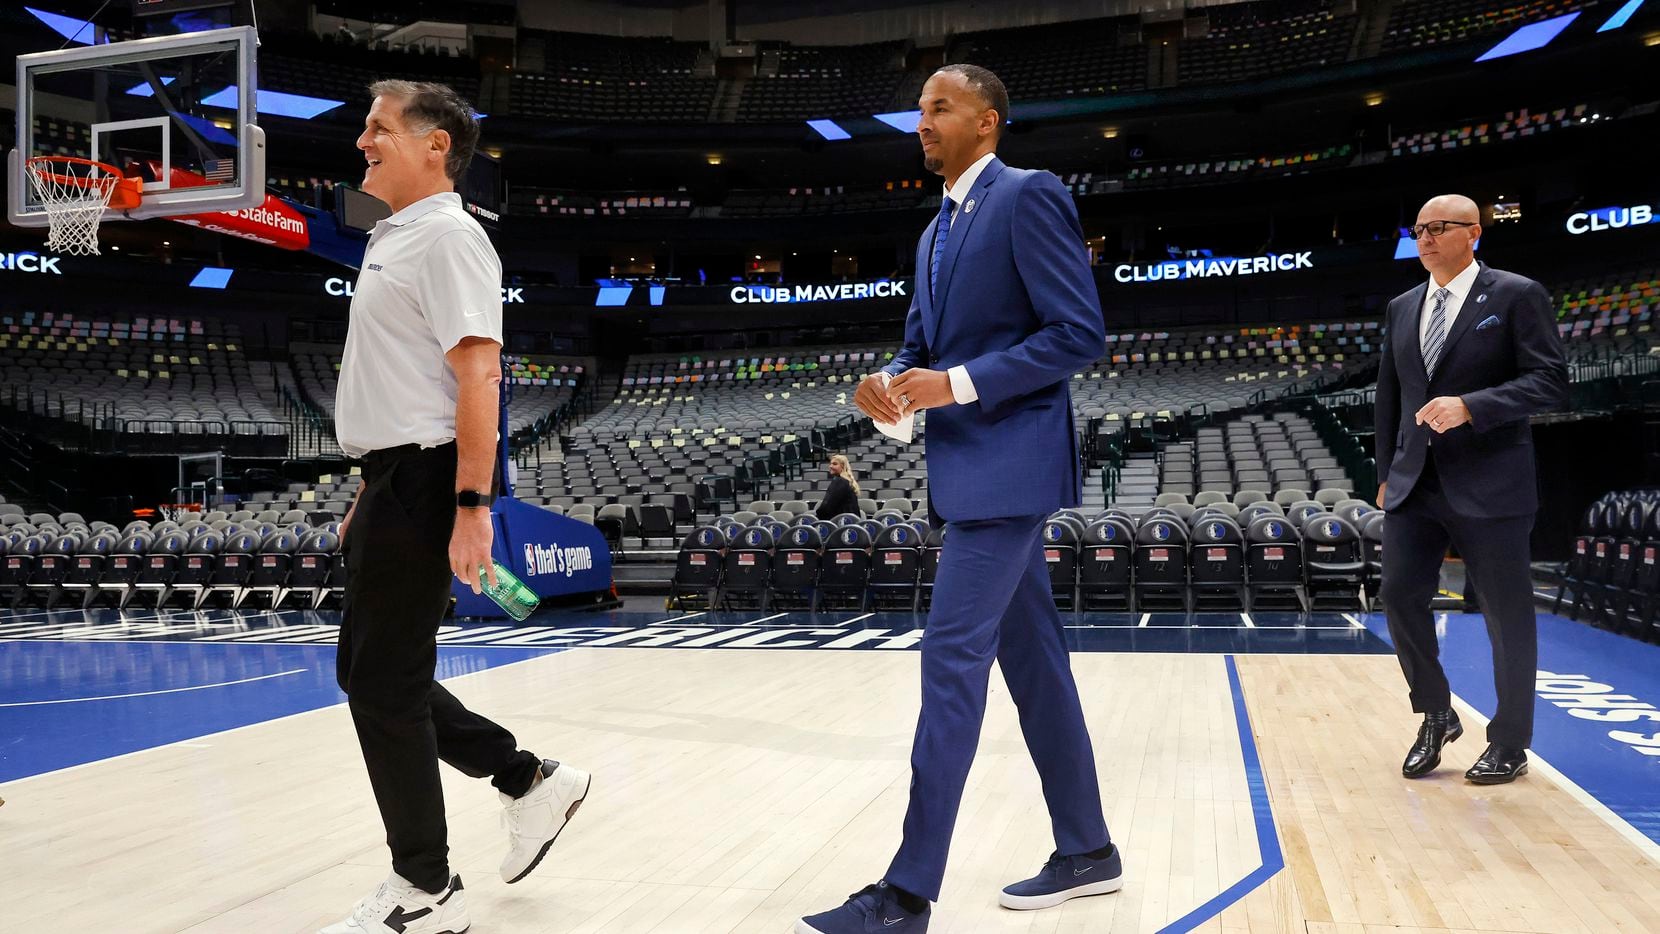 Dallas Mavericks owner Mark Cuban (left), new general manager Nico Harrison (center), and new head coach Jason Kidd arrive for a press conference to formally introduce them at the American Airlines Center, Thursday, July 15, 2021.